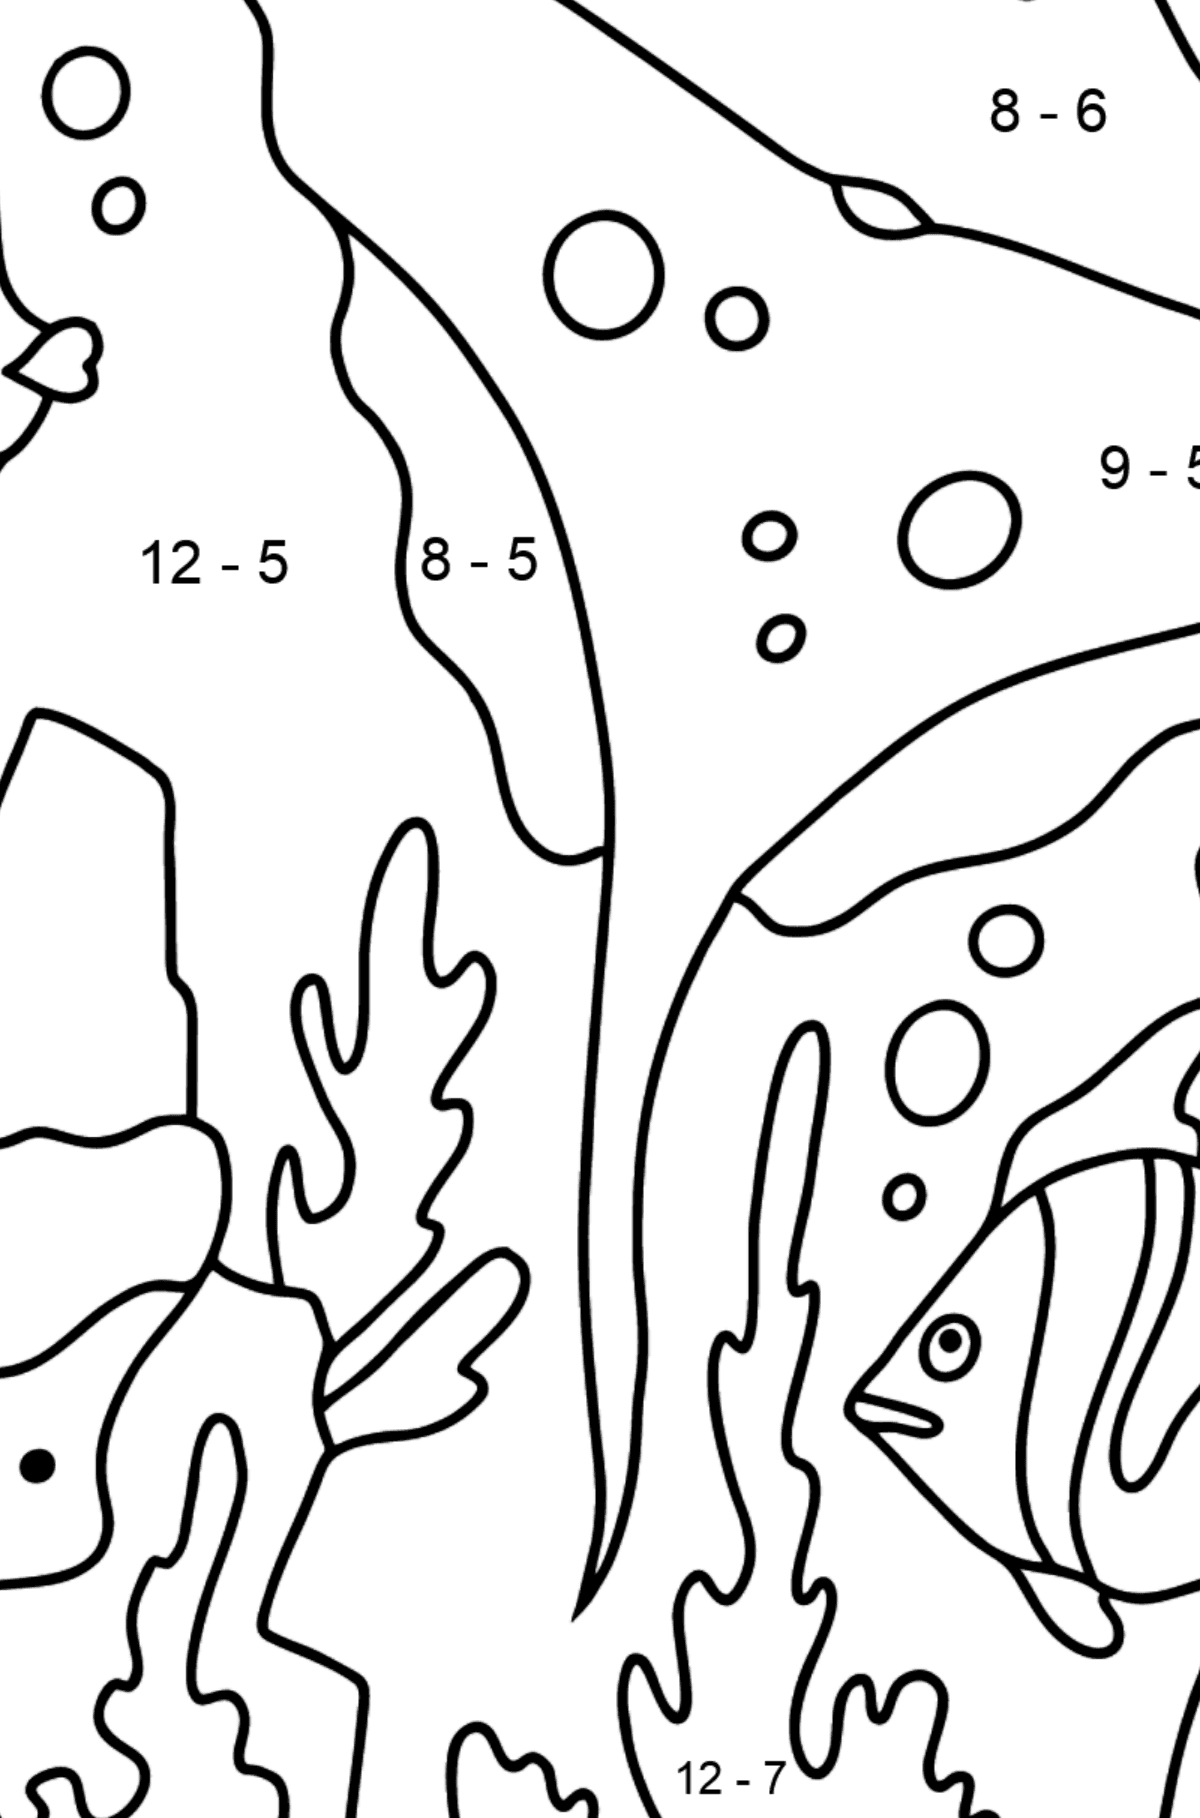 Coloring Page - Fish are Playing with a Charming Stingray - Math Coloring - Subtraction for Kids